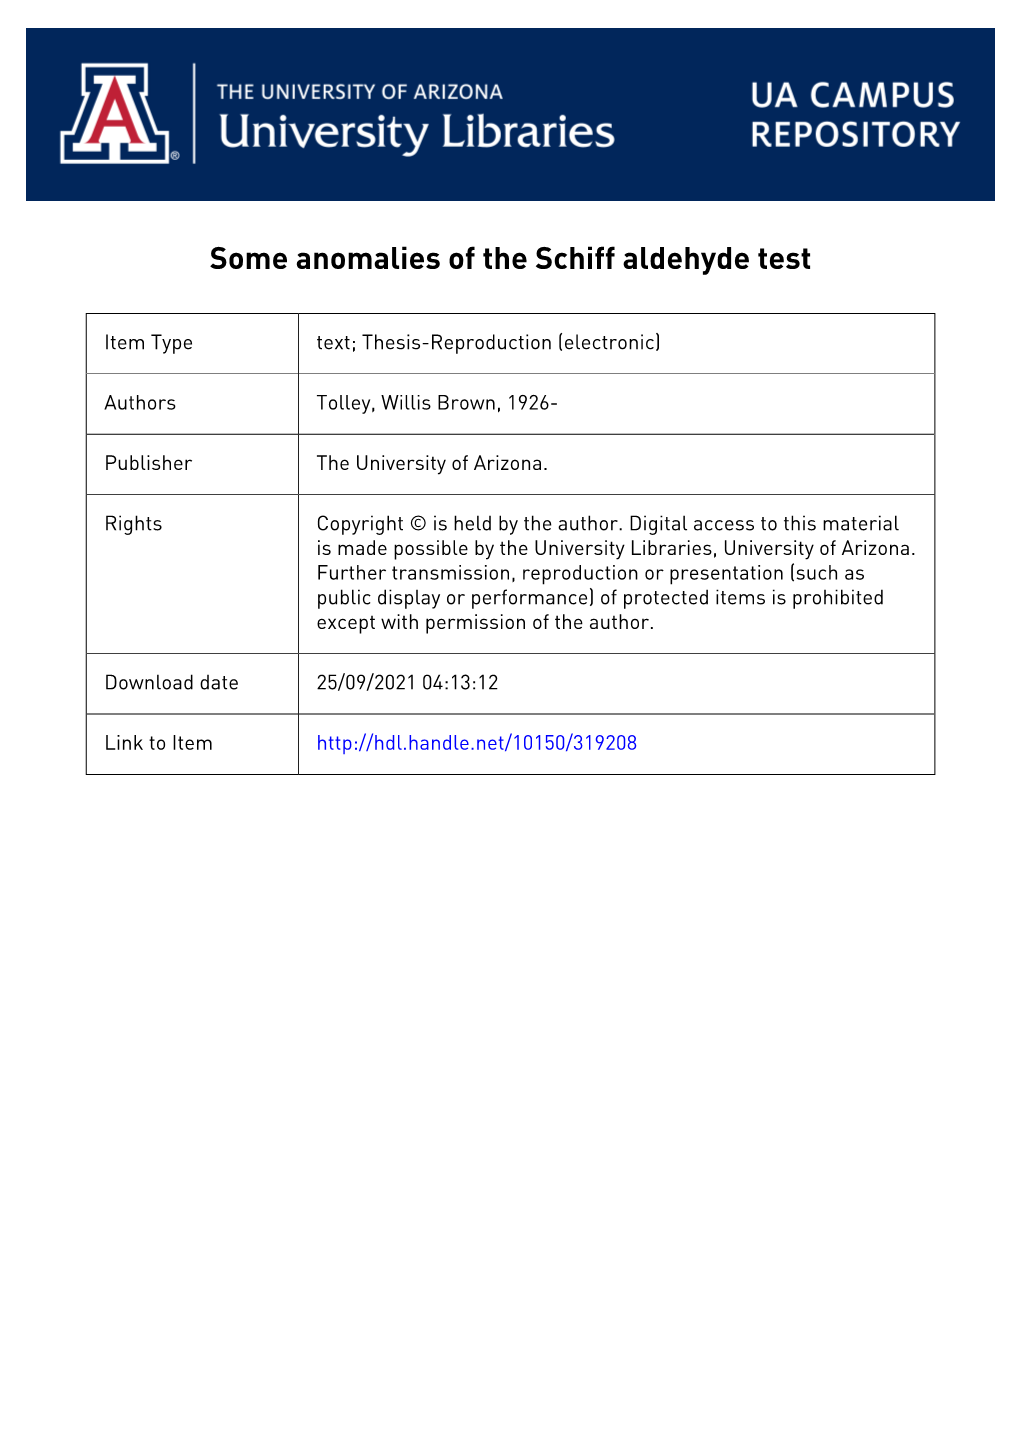 SOME 'Akoifialibs of the SCHIFF •ALDEEIDE TEST V By